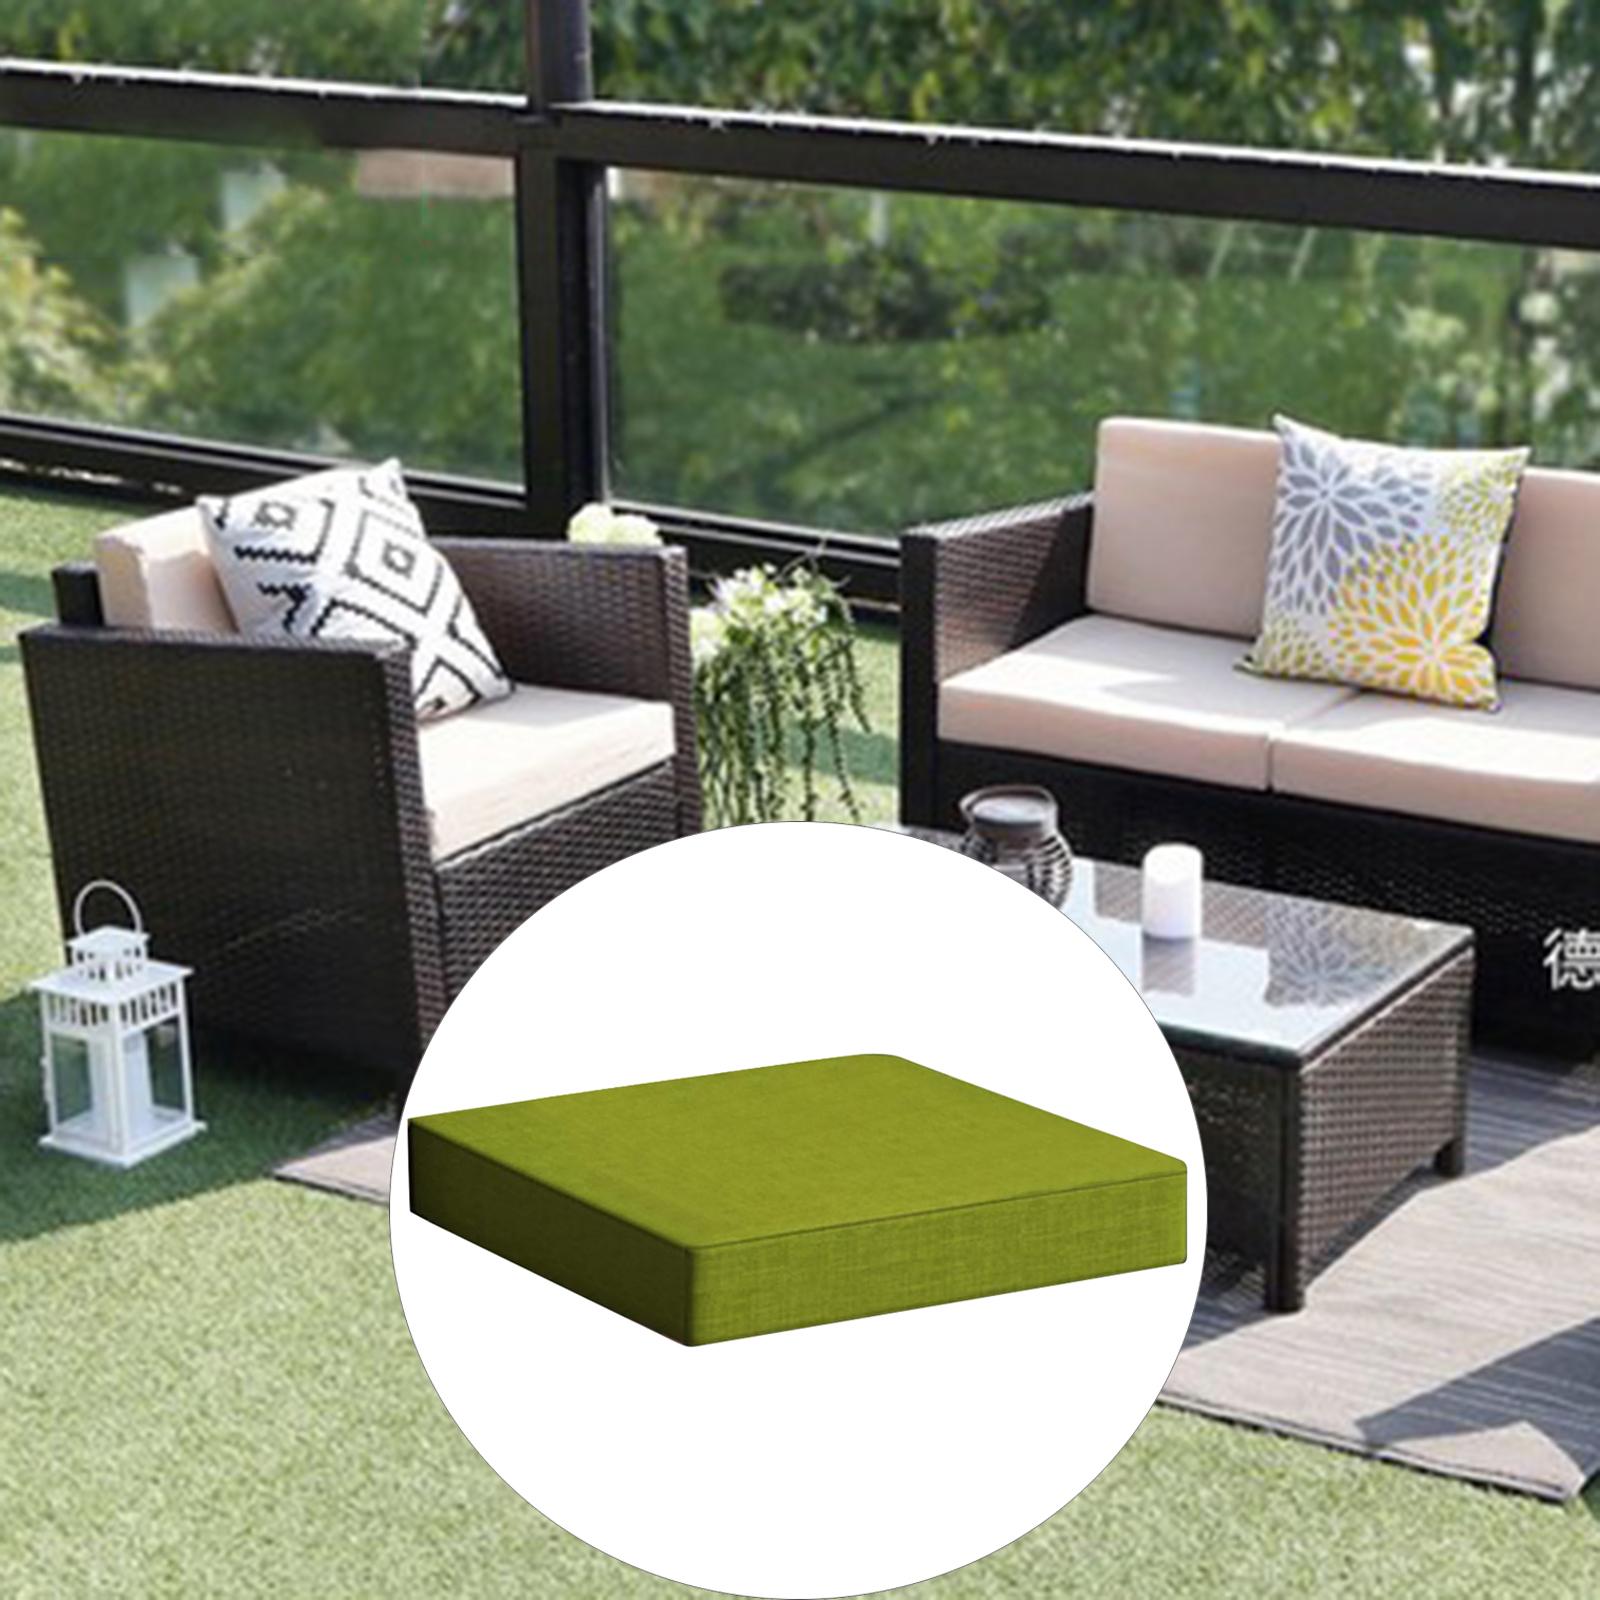 Seat Pads Cushion ,Waterproof Chair Cushions Garden Cushion,Furniture Seat Pads Cushion Pad Indoors Outdoors,Garden Seat Pads Cushion Memory Foam for chairs, Garden Green - image 5 of 6